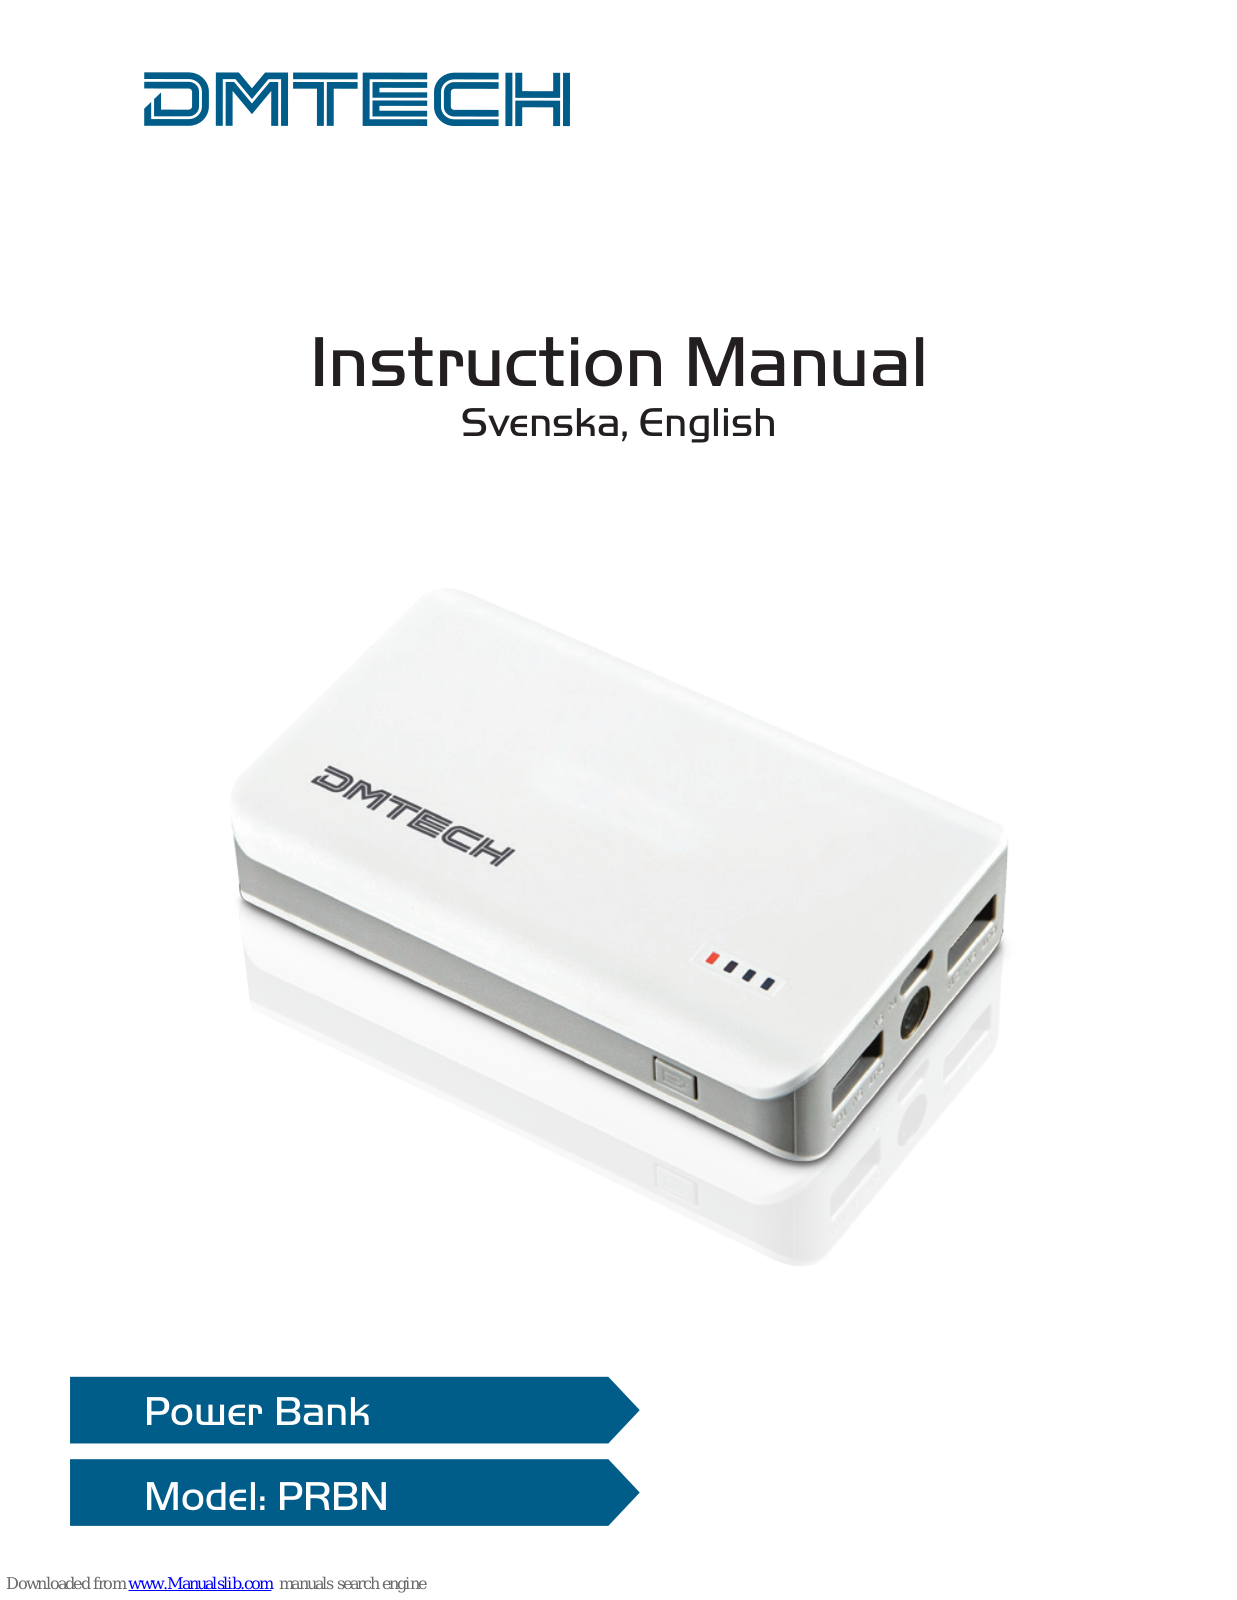 DMTech PRBN Instruction Manual